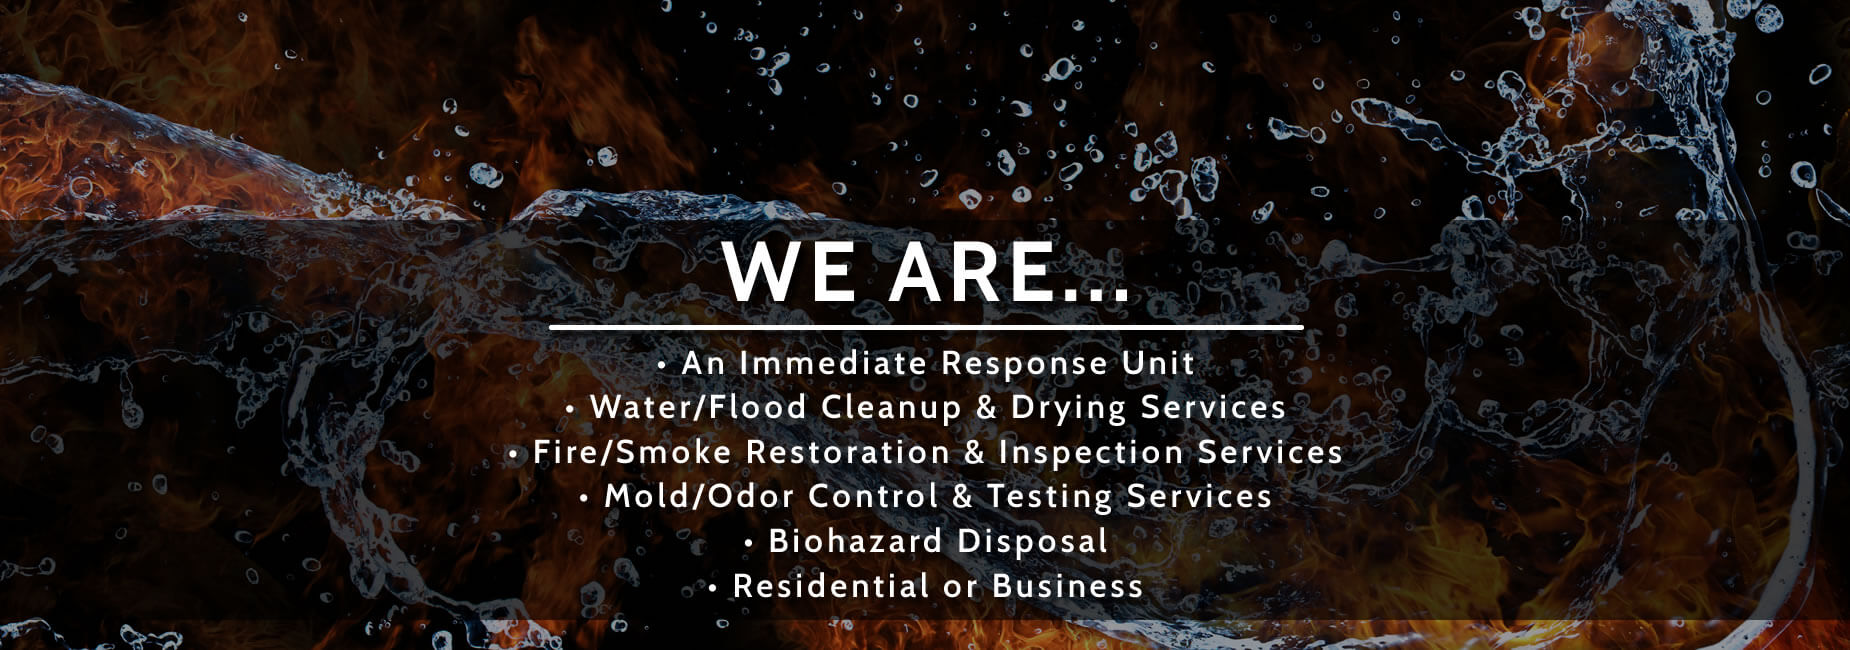 We are...an immediate response unit, water/flood cleanup & drying, fire & smoke restoration inspection, mold & odor control testing, biohazard disposal, all available in home or office.